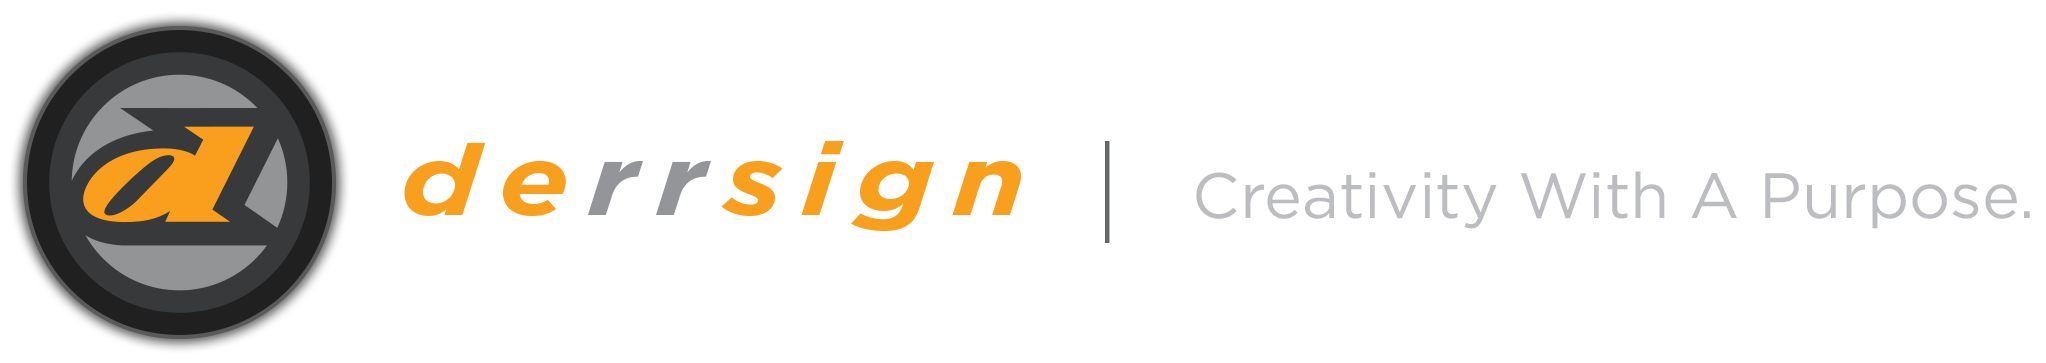 Derrsign - Creativity with a Purpose